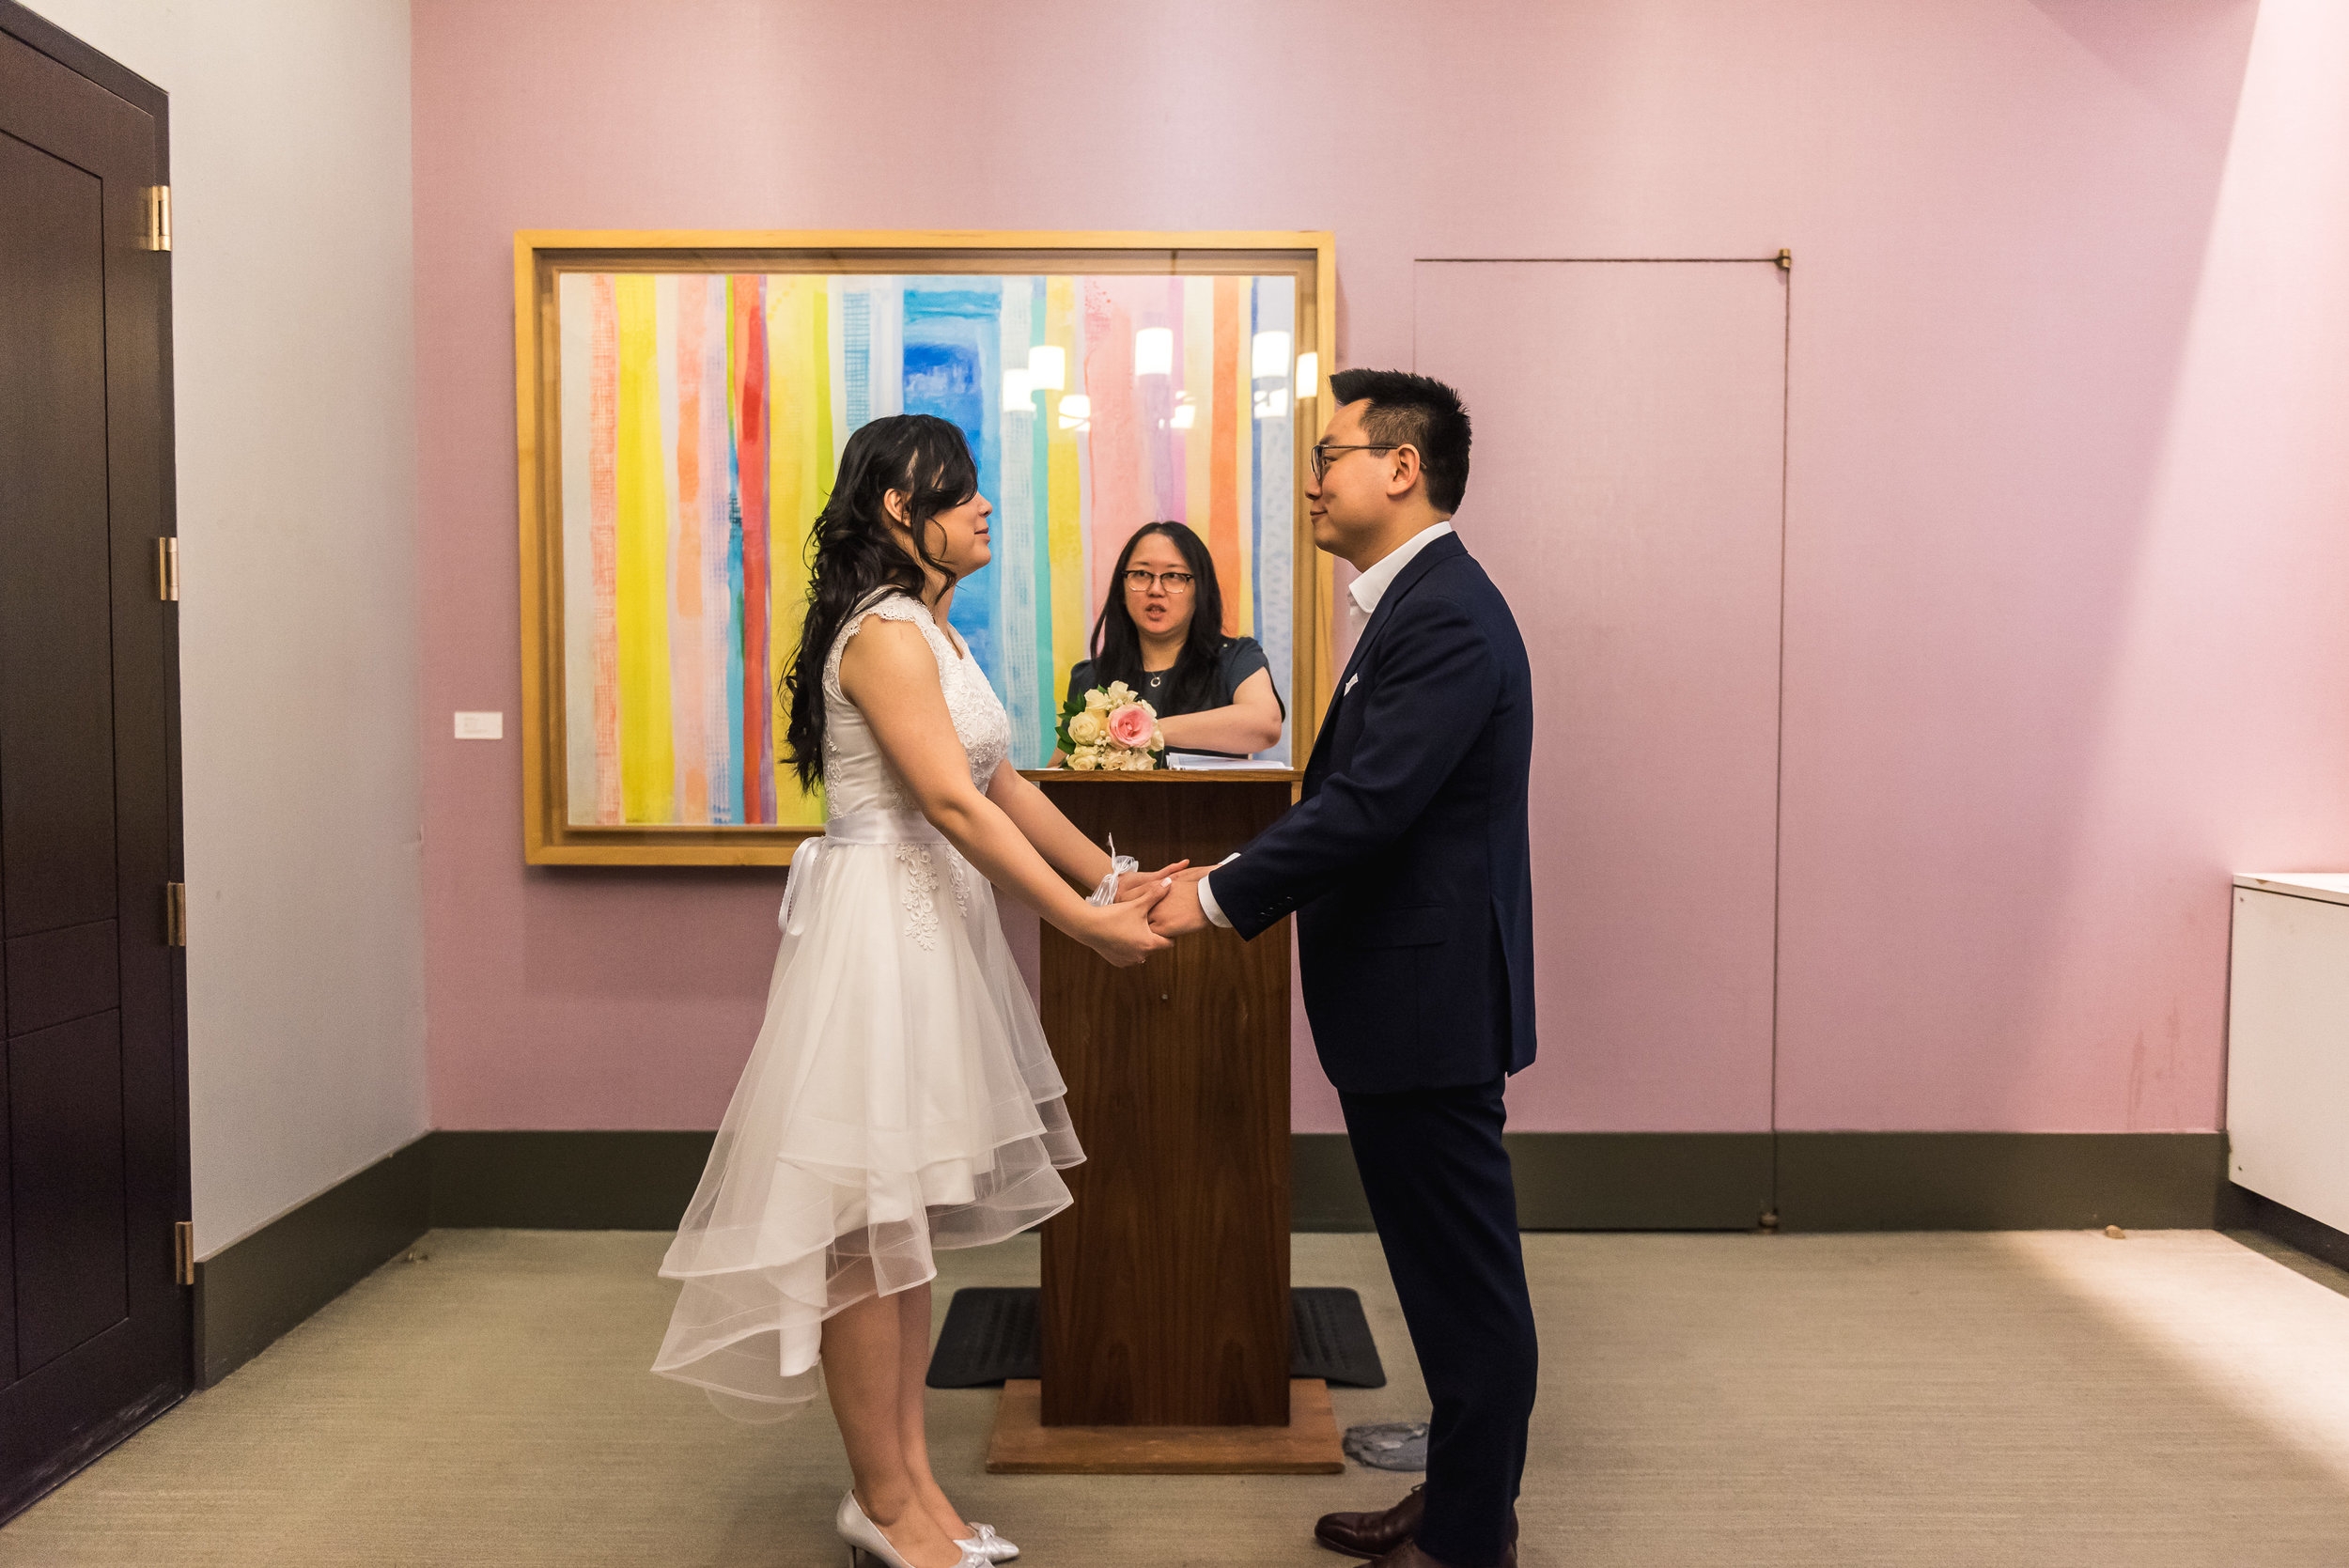  many and andy had a low key ceremony at city hall in manhattan, new york. Part of being a photojournalistic photographer is being able to set up natural looking photos that tell the story of their day. after the ceremony, we took some photos in the 